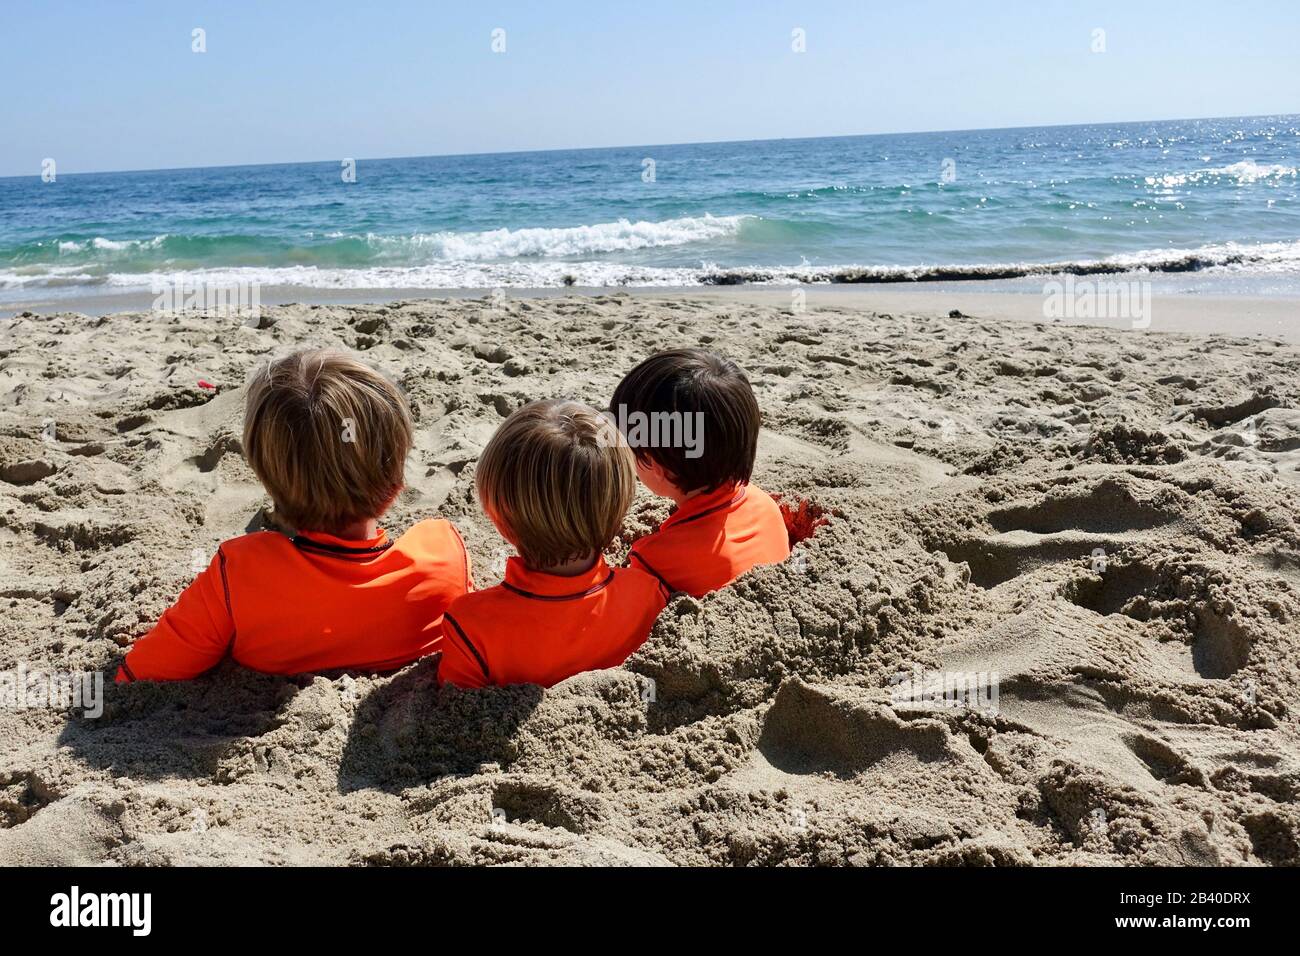 Three cousins sit buried in the sand while looking out at the ocean. Stock Photo